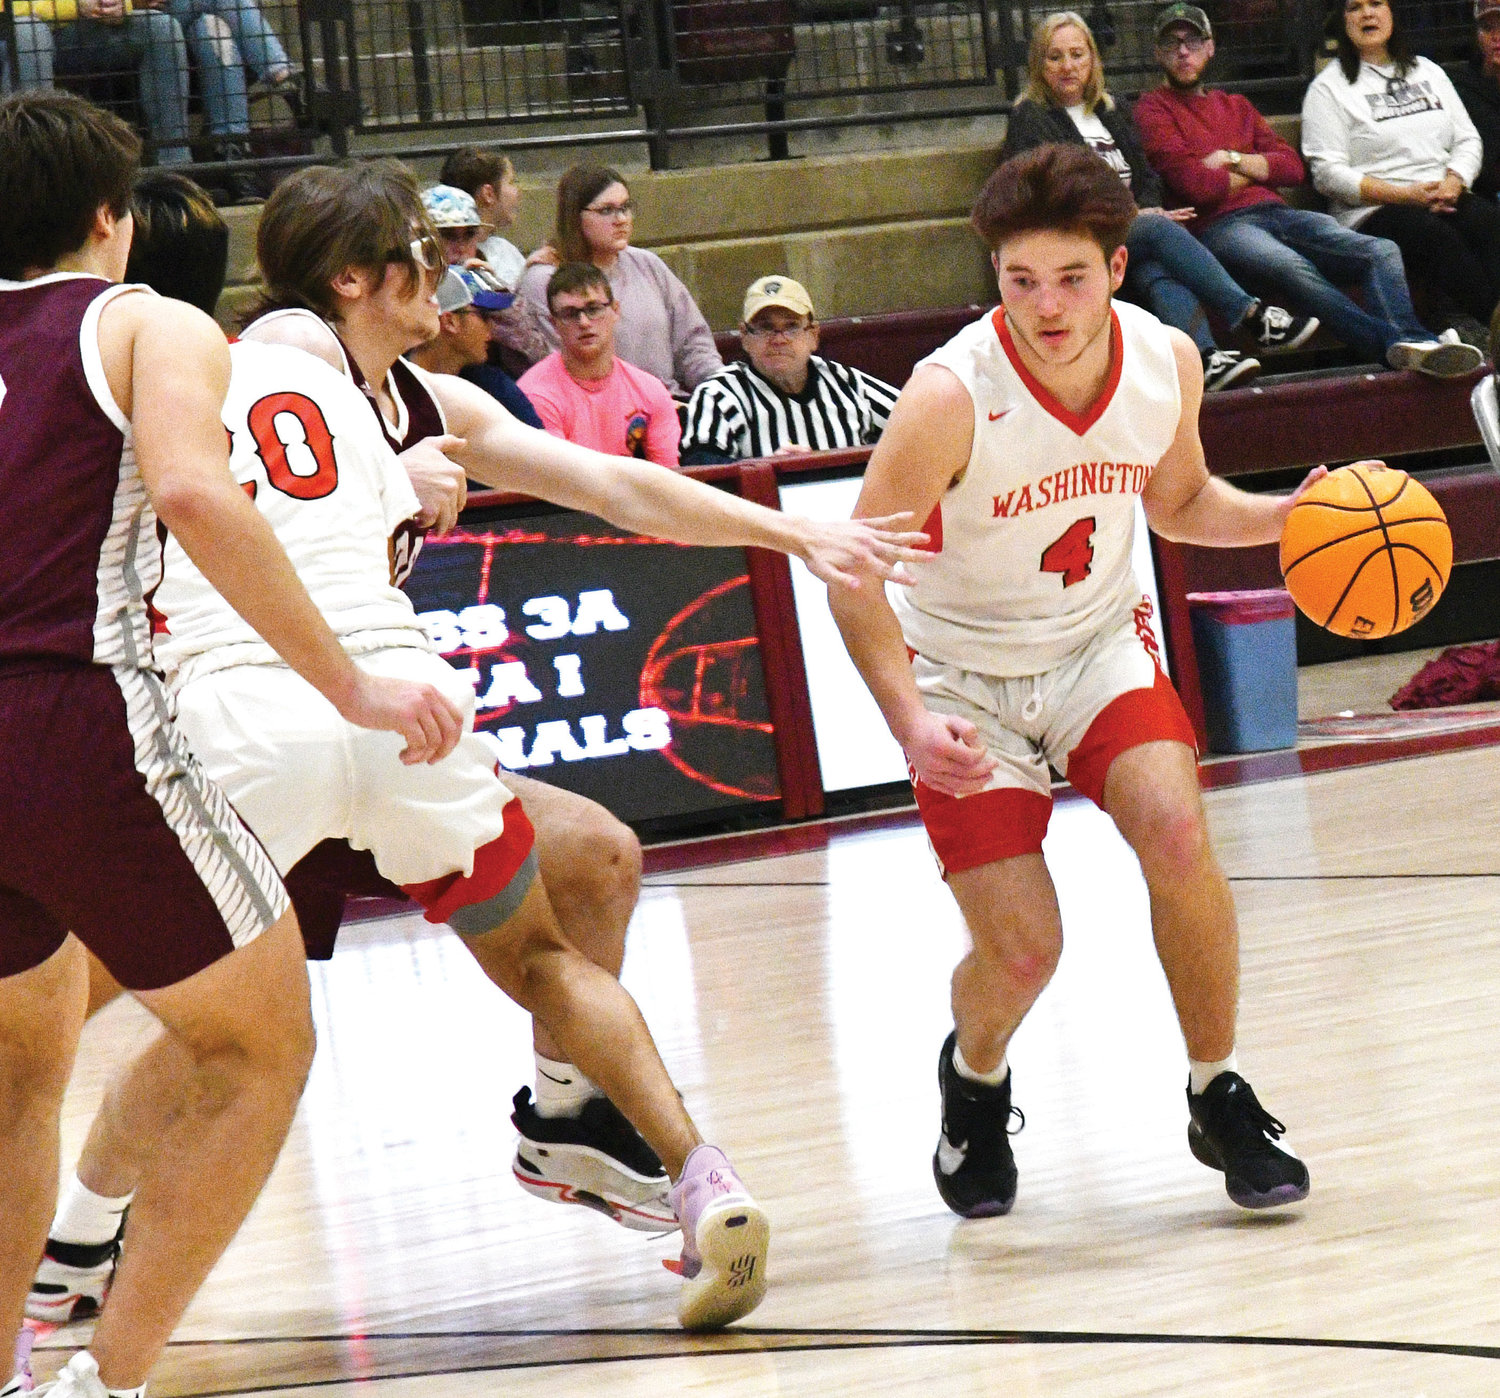 Washington senior Jamison Holland finds room during the Warriors’ 63-61 win over Perry in the Regional basketball tournament. Holland scored two points in the win.